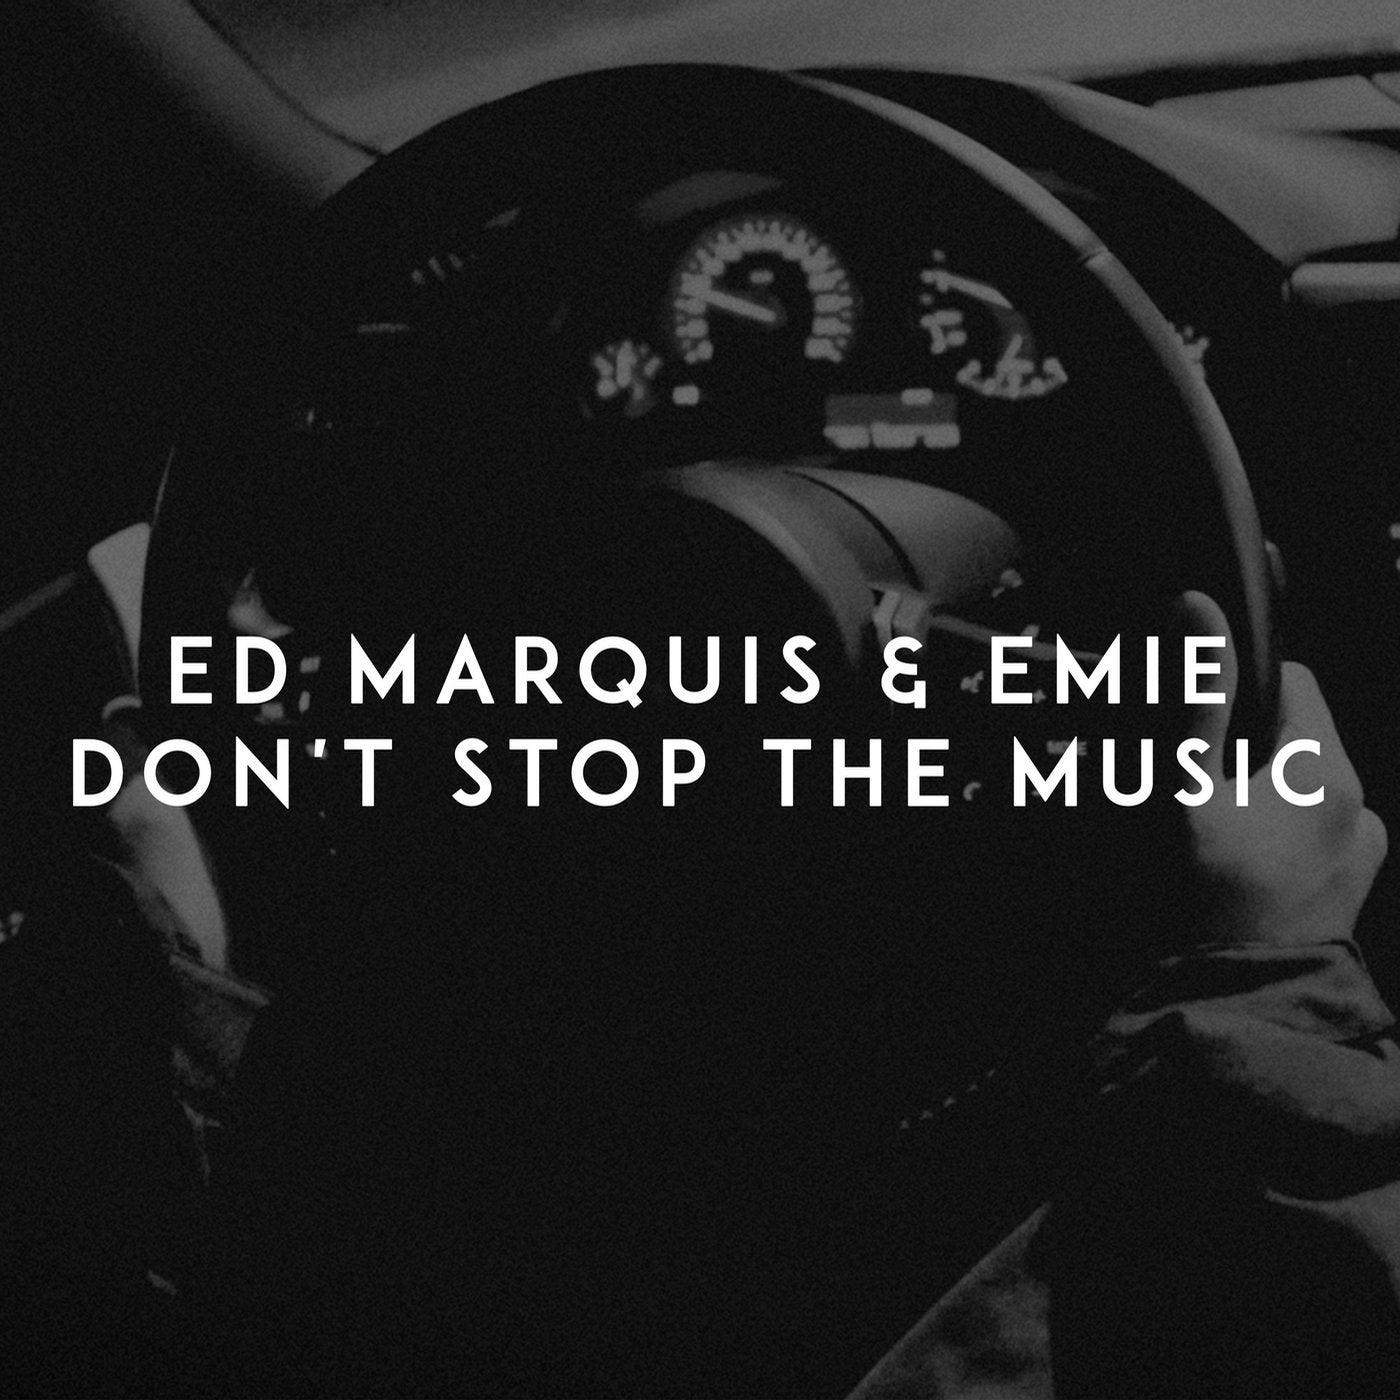 Музыка dont. Ed Marquis. Don't stop the Music ed Marquis. Ed Marquis, Emie. Don't stop the Music от ed Marquis & Emie.